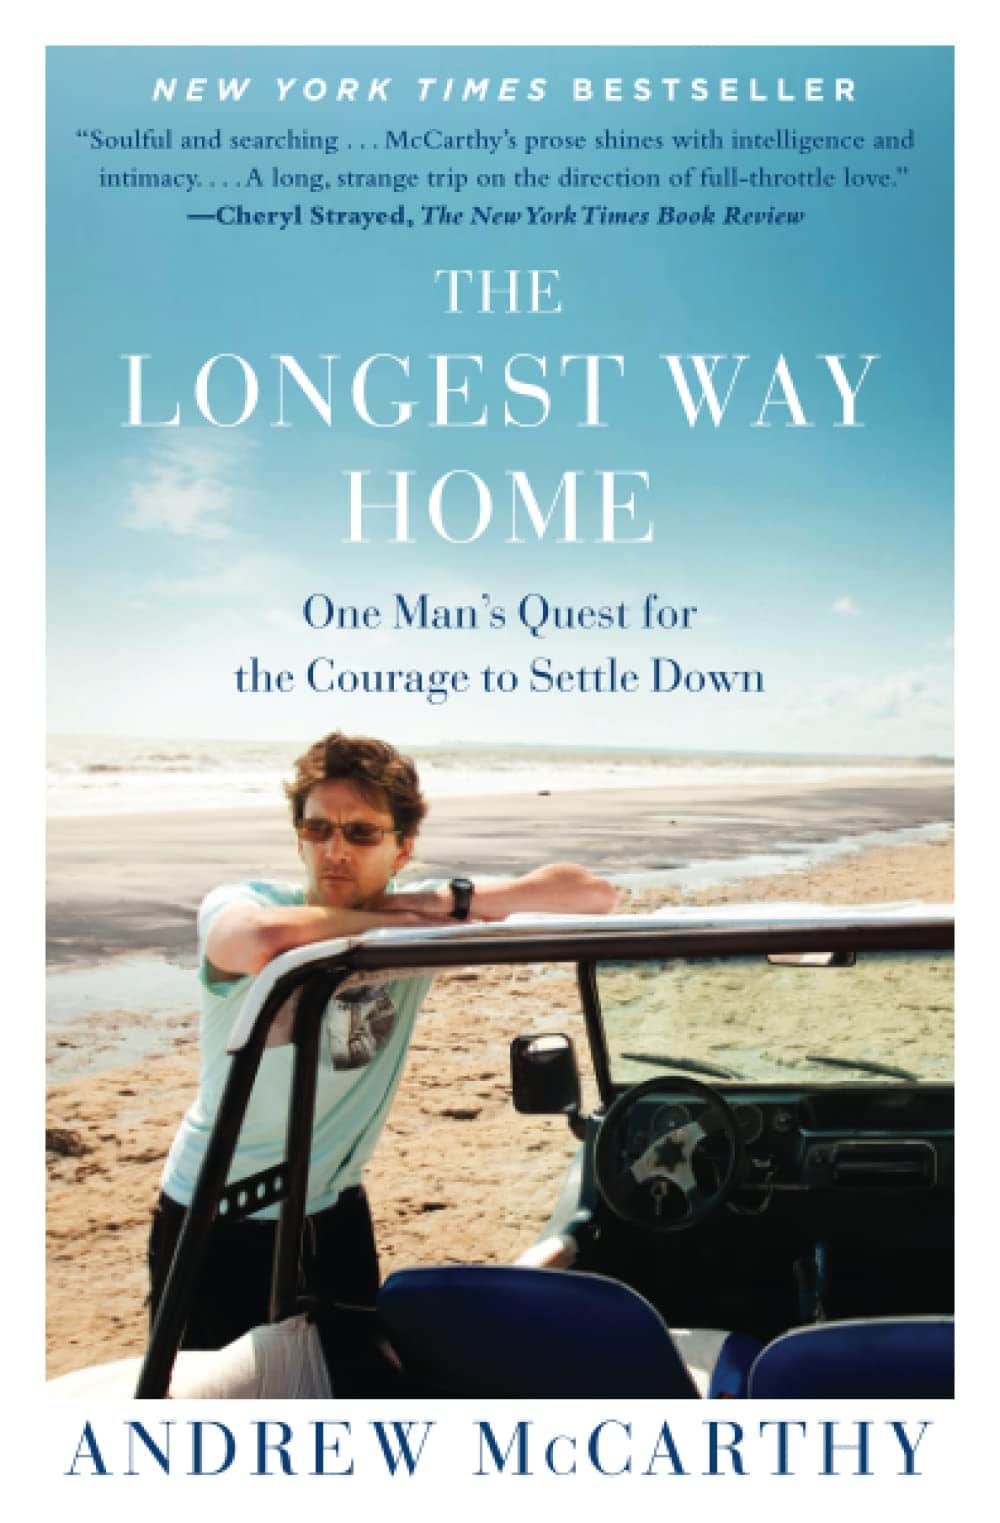 The Longest Way Home, a travel memoir by Andrew McCarthy